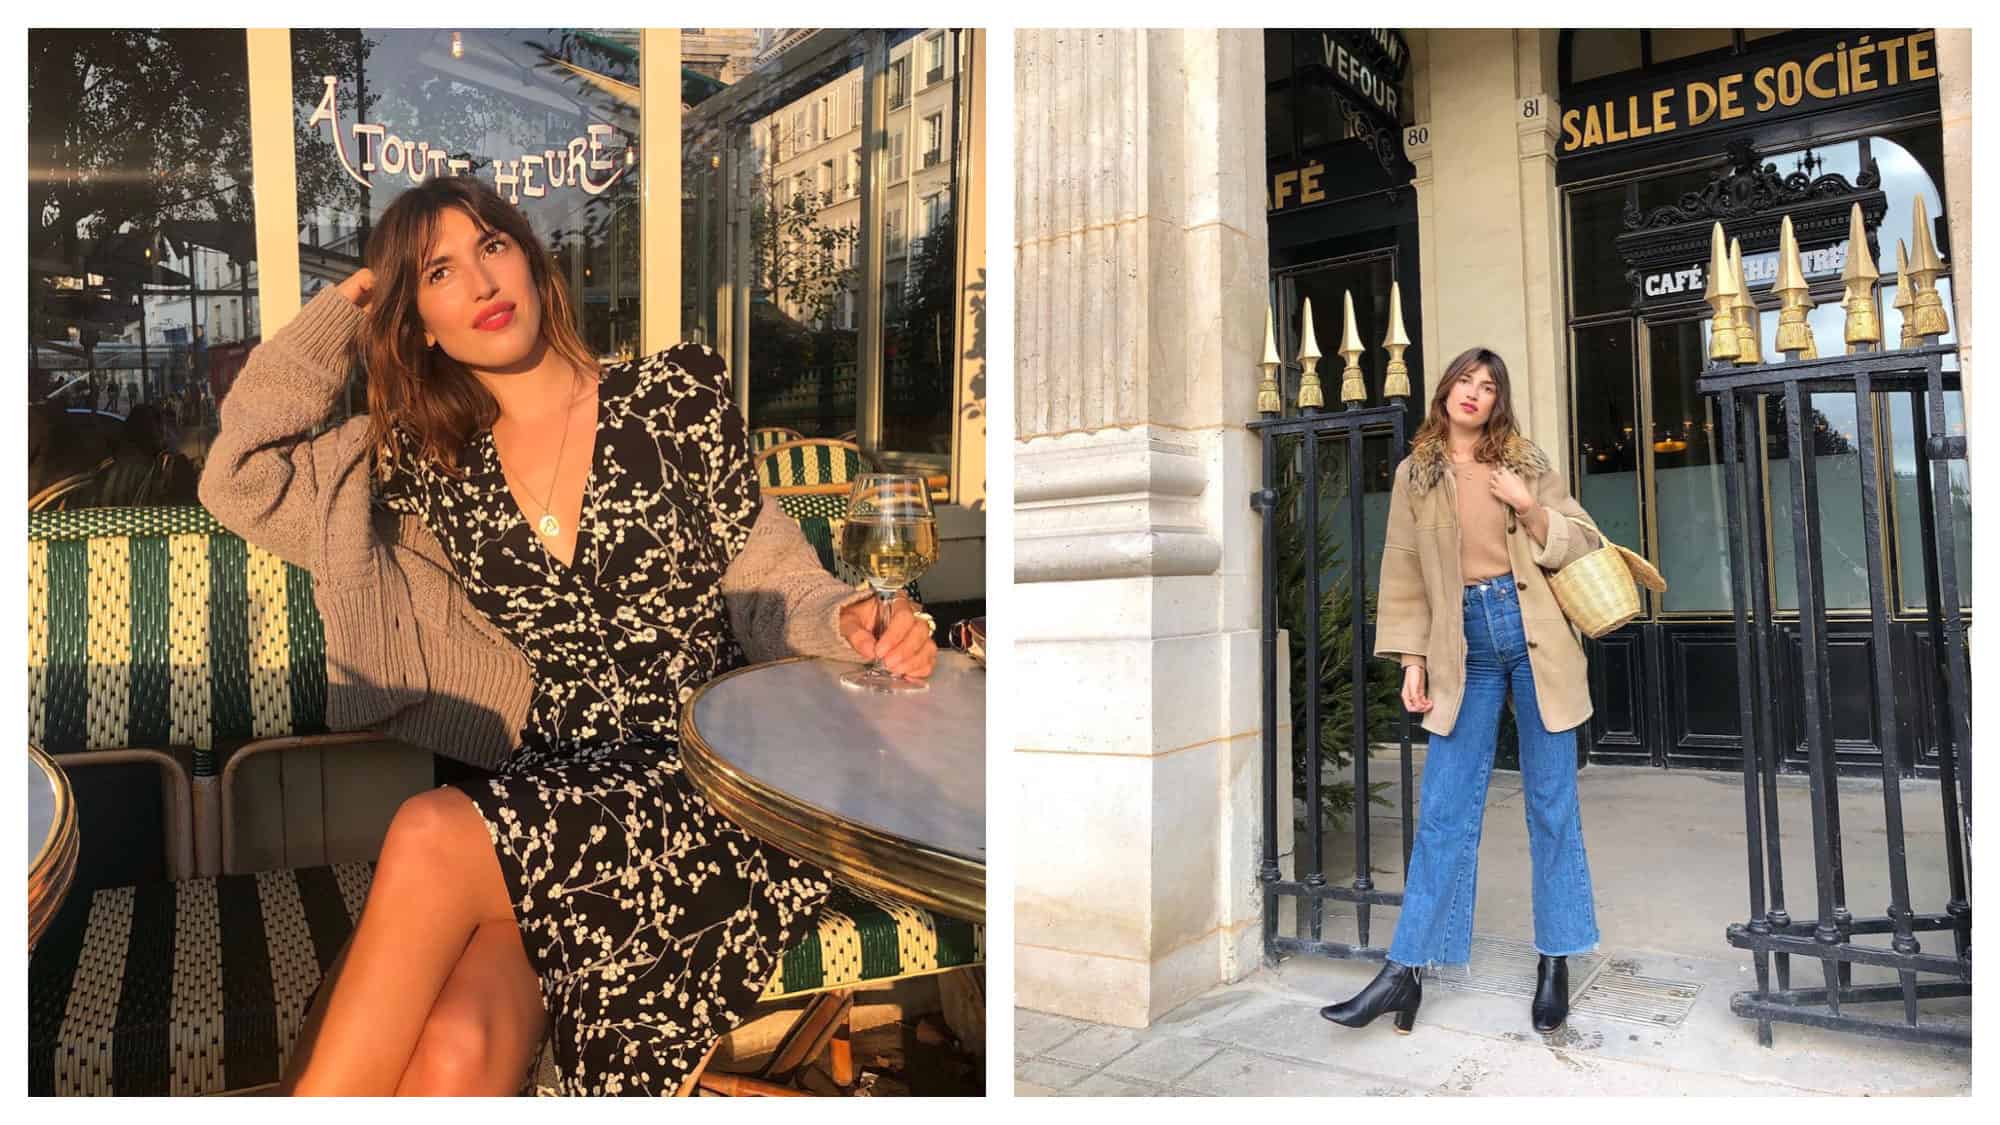 French Instagram fashion influencer Jeanne Damas, sitting at a Parisian café with a glass of wine in the sun (left). Jeanne Damas at the Jardin du Palais Royal in Paris, wearing flared frayed jeans and a Jane Birkin style basket as a handbag (right).